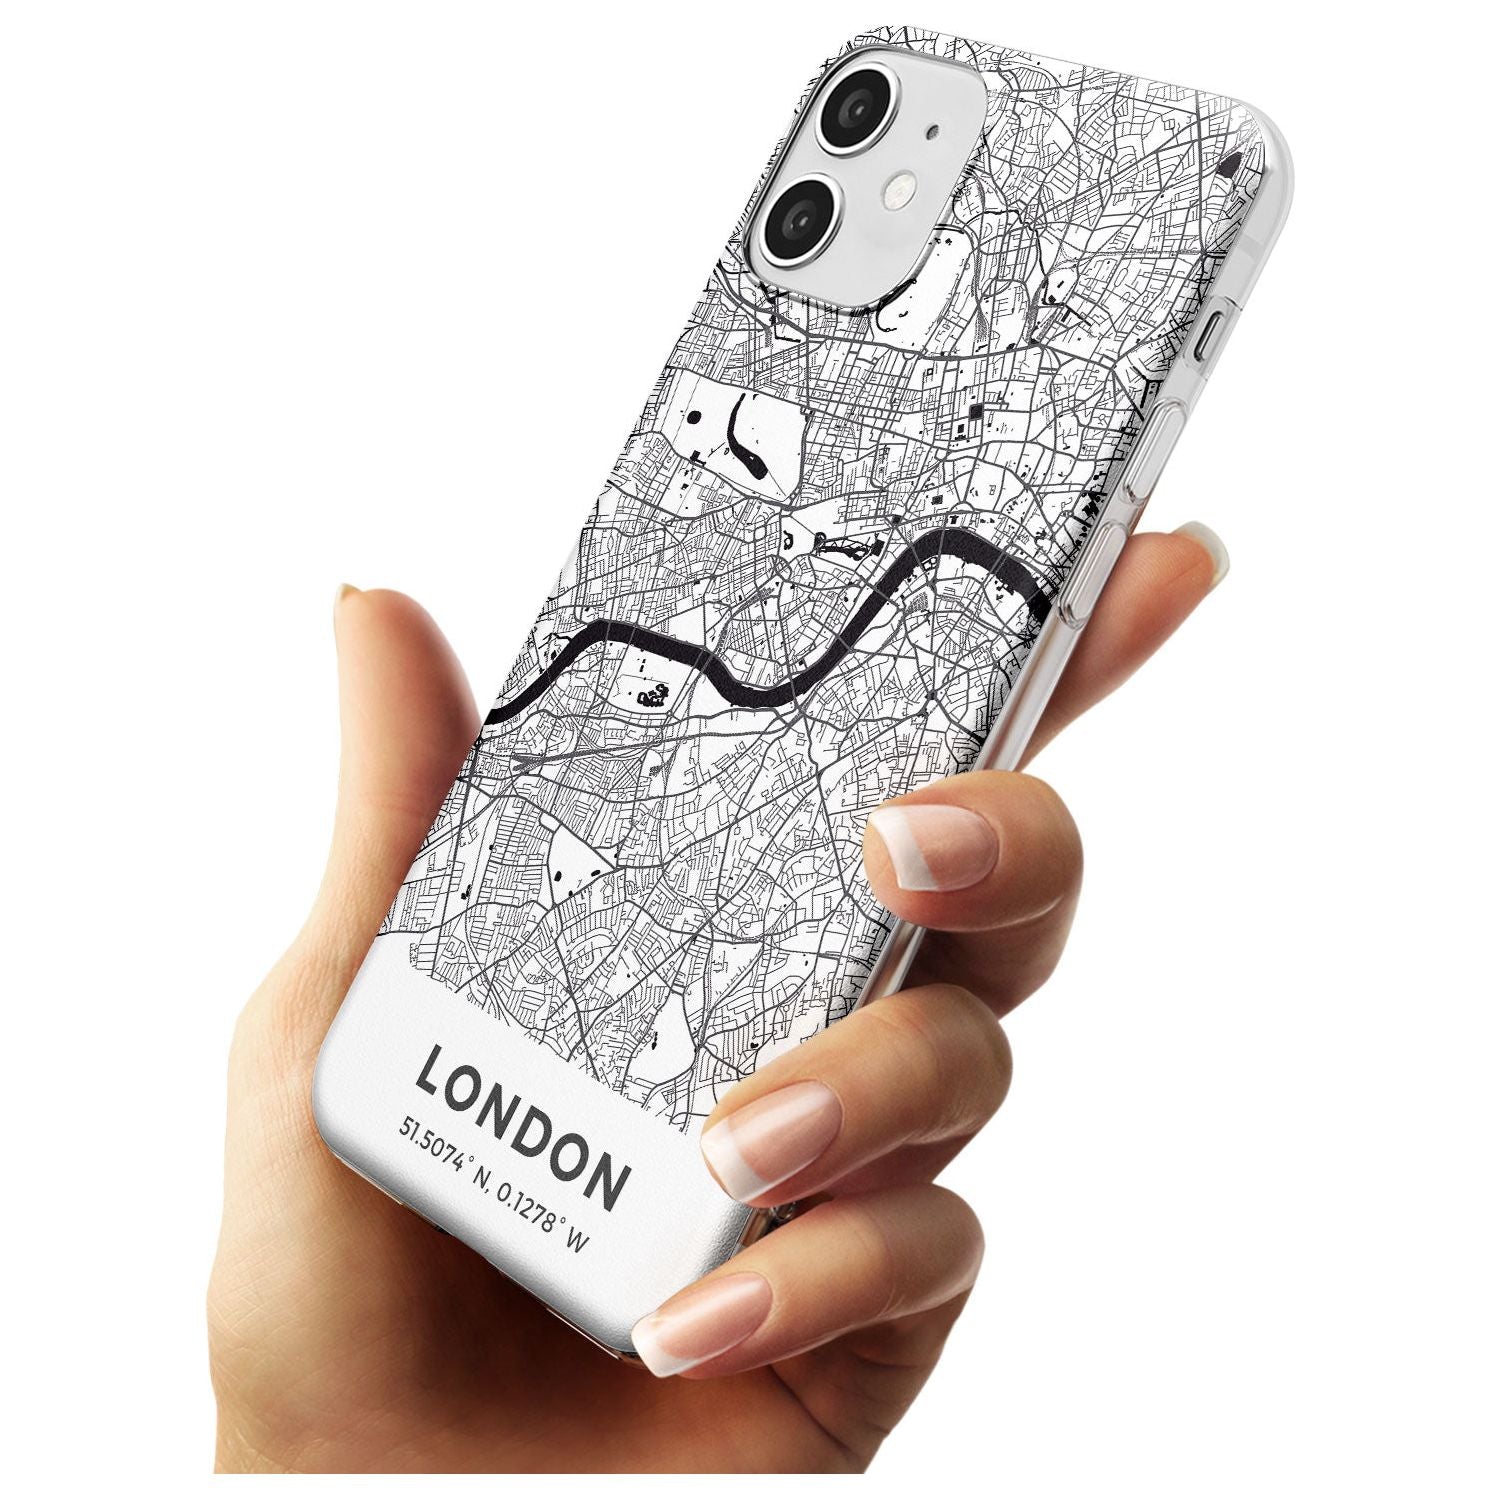 Map of London, England Slim TPU Phone Case for iPhone 11